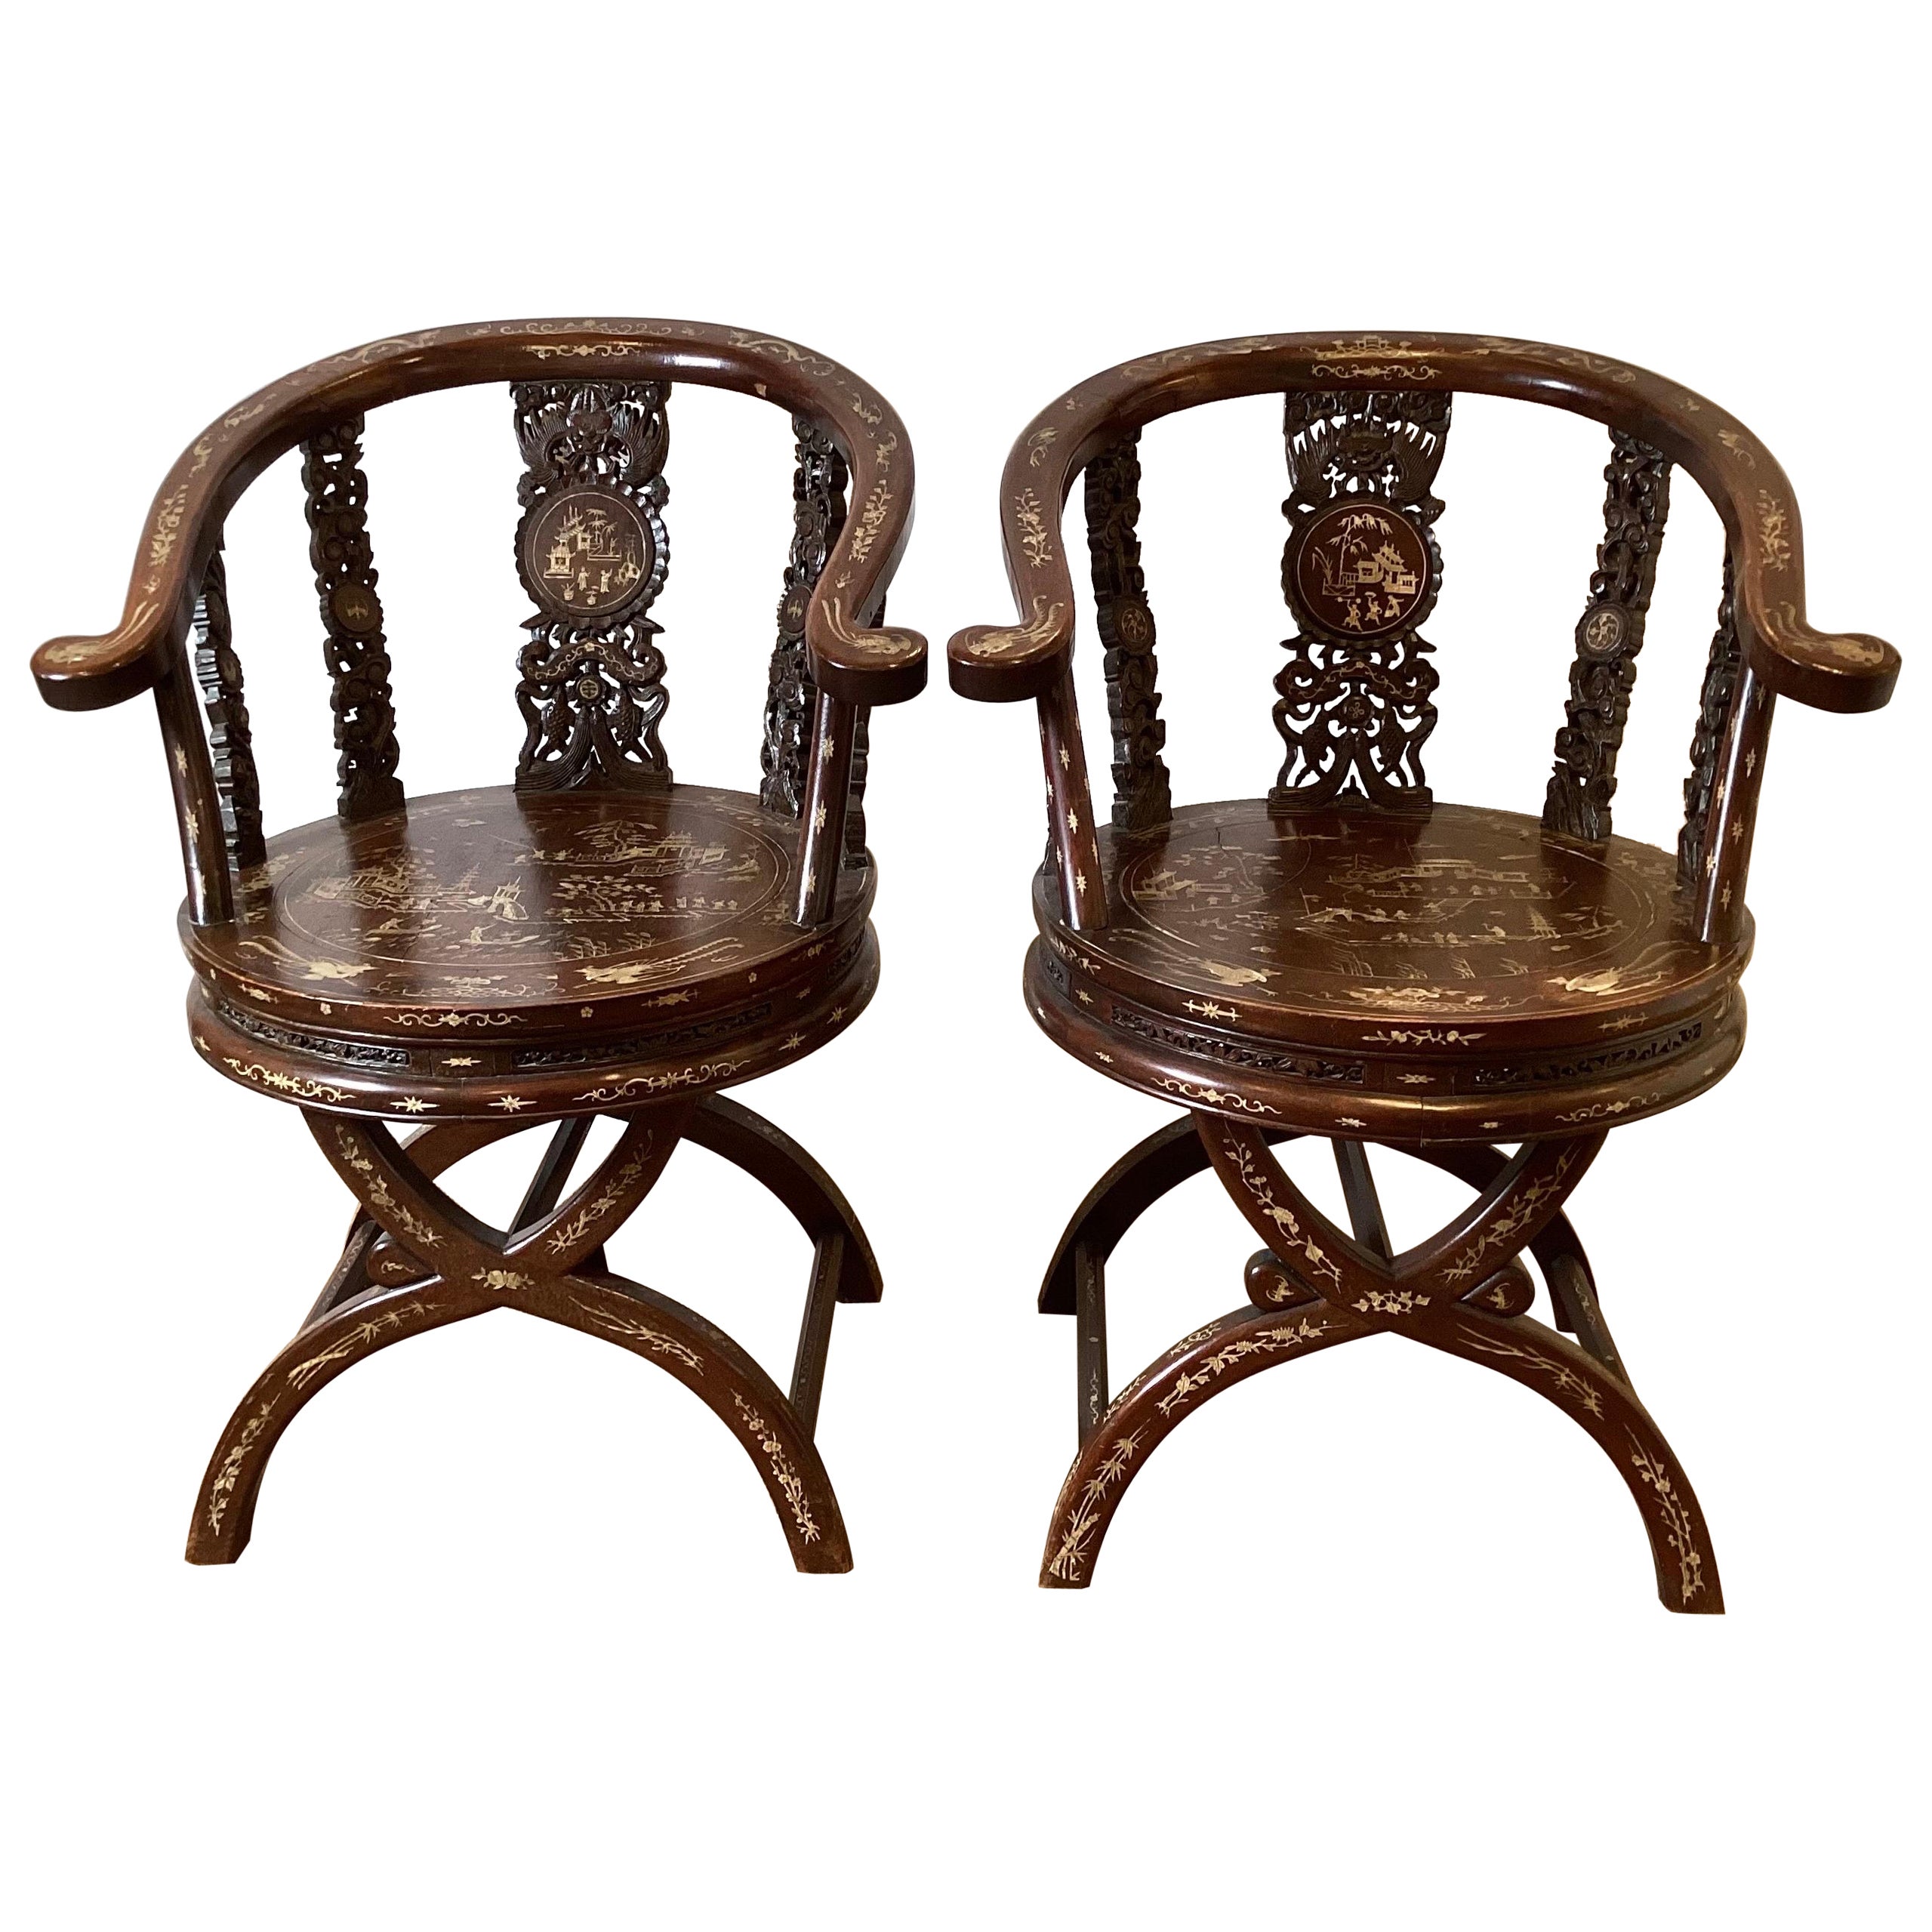 Circa 1890-1900 Hand Carved and Inlaid Asian Arm Chairs Depicting a Village For Sale